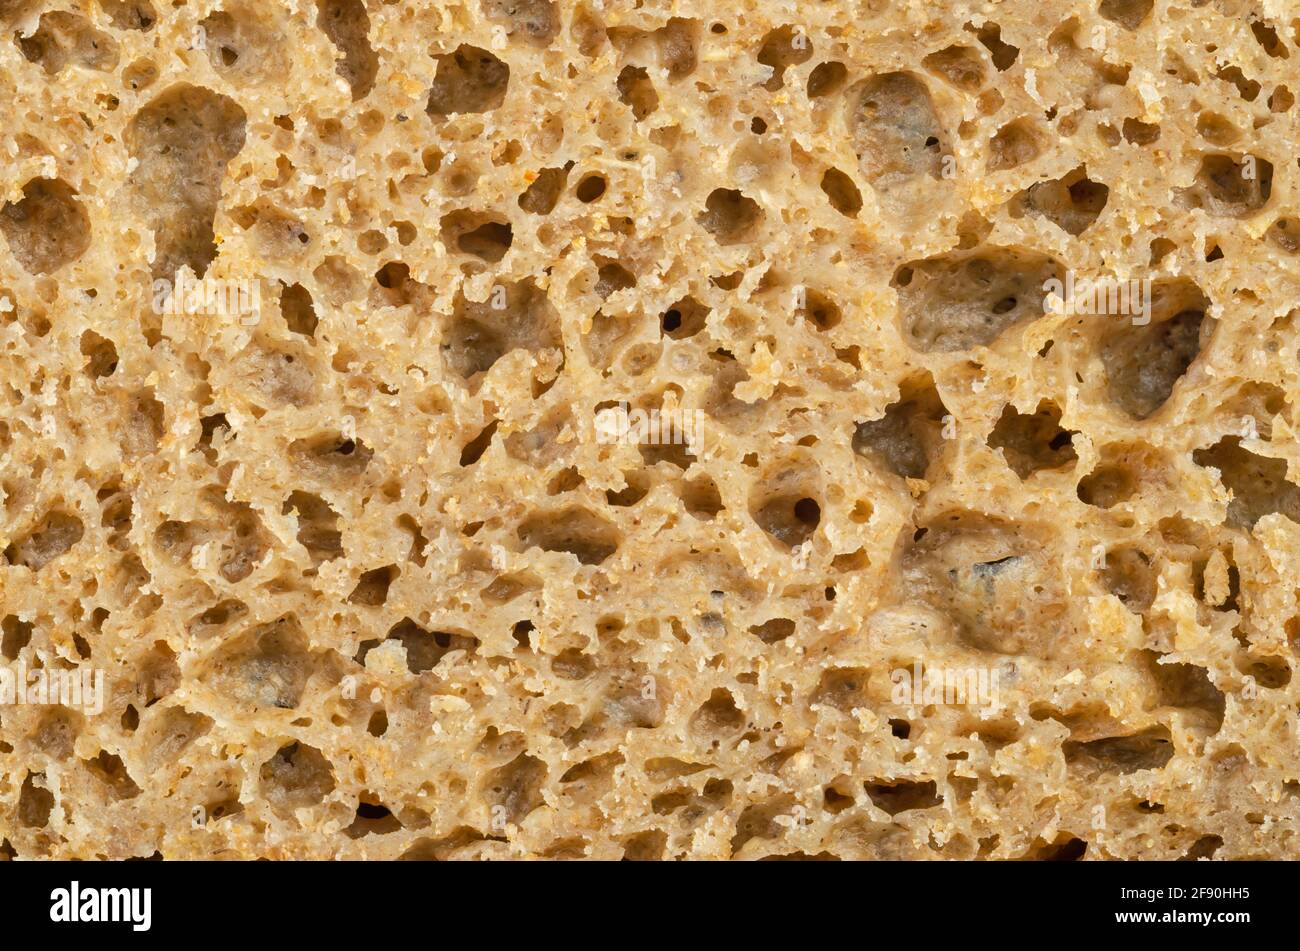 Surface of a fresh cut rye bread, close-up from above. Brown colored sourdough bread, a mix of rye grain flour, leaven and spices, baked in an oven. Stock Photo